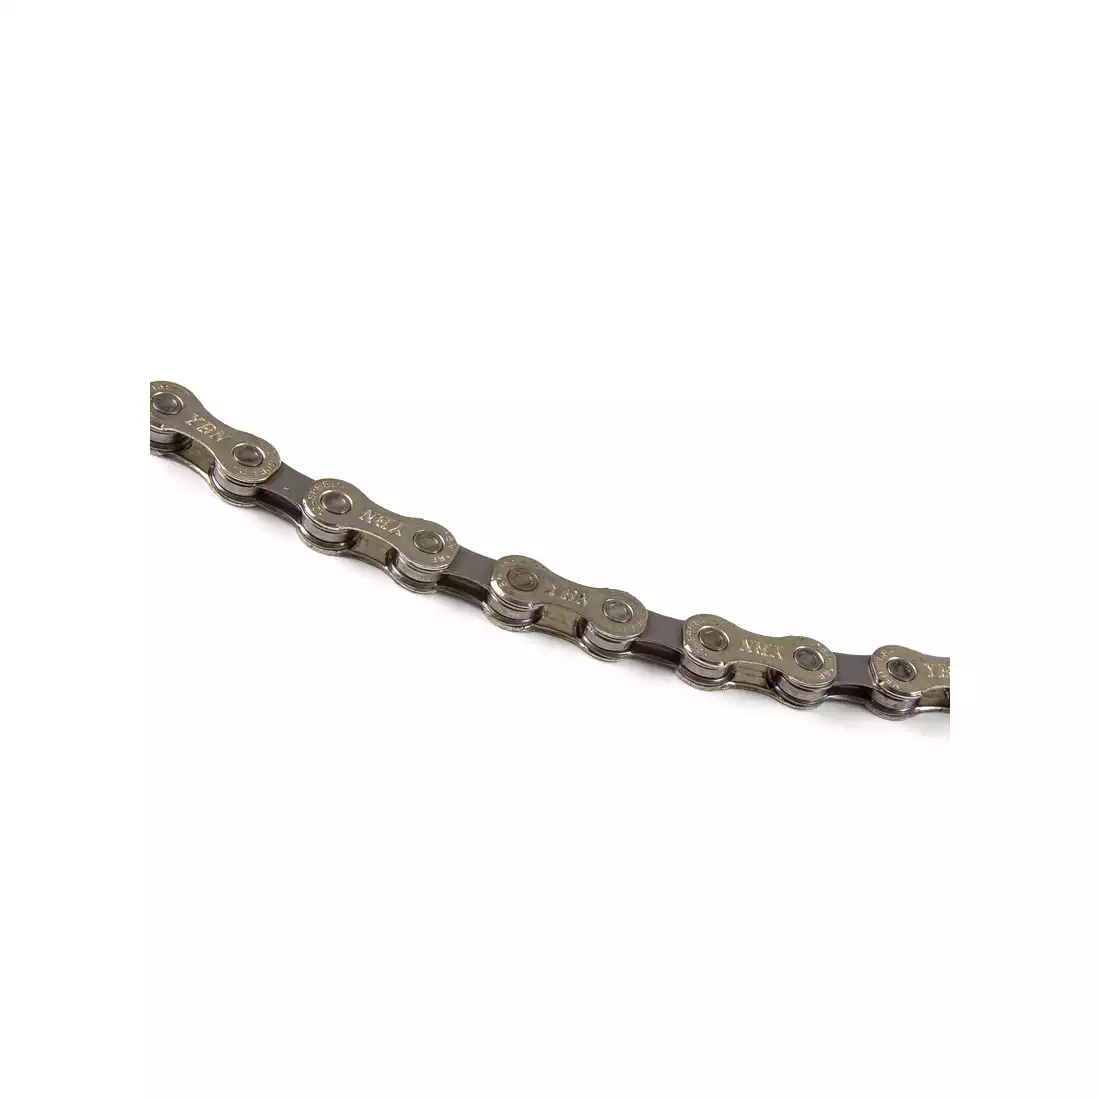 CLARKS C5-7 Bicycle chain 5-7-speed, 116 links, Road / MTB, Silver